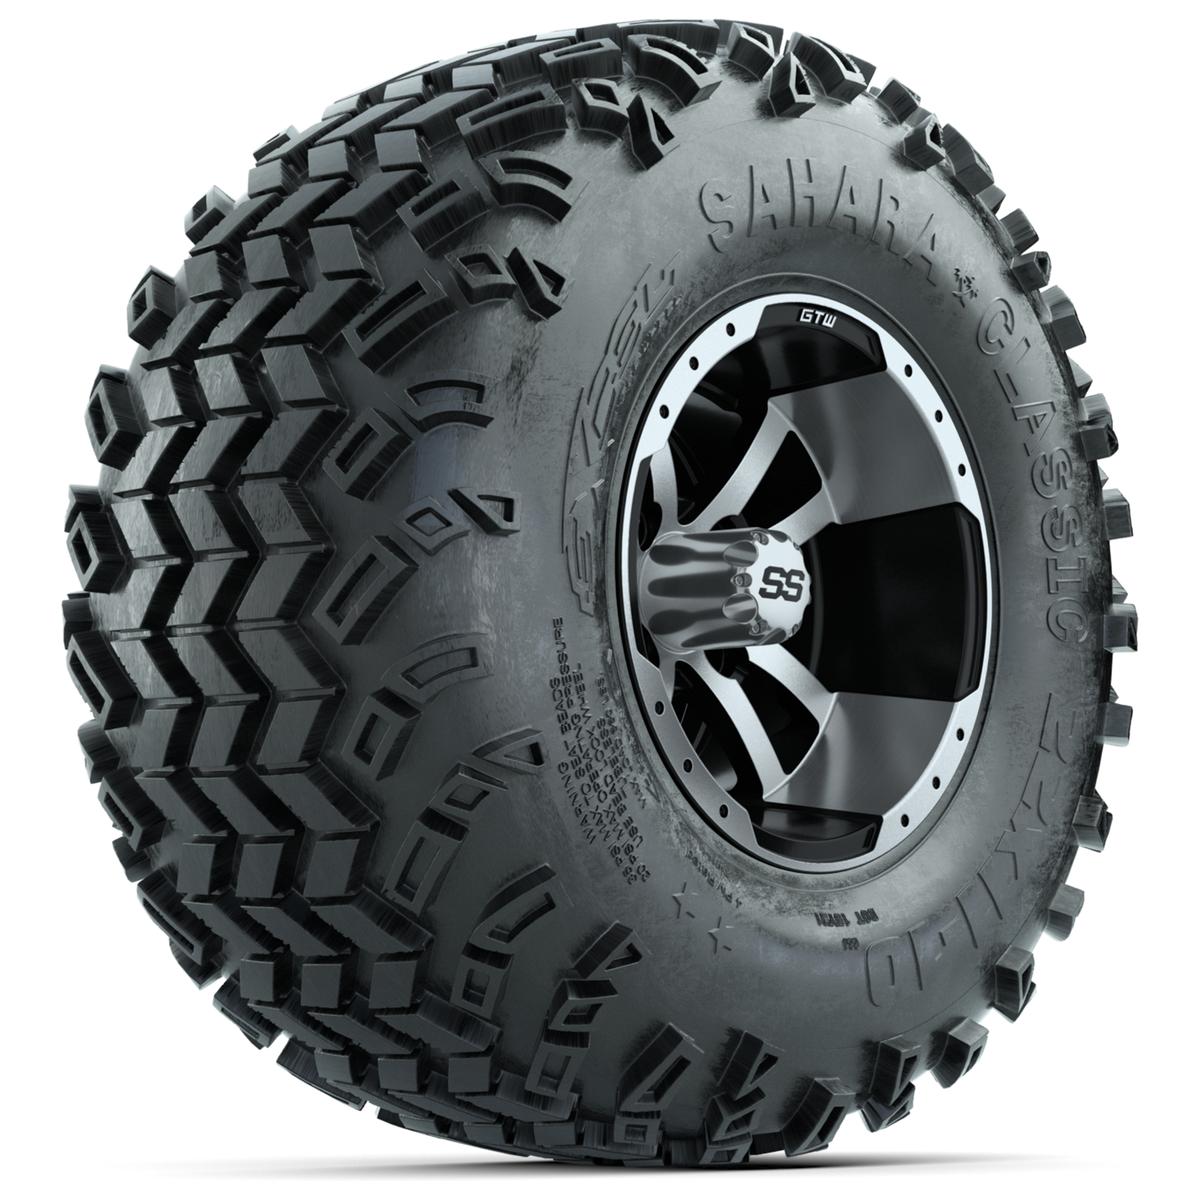 Set of (4) 10 in GTW Storm Trooper Wheels with 22x11-10 Sahara Classic All-Terrain Tires